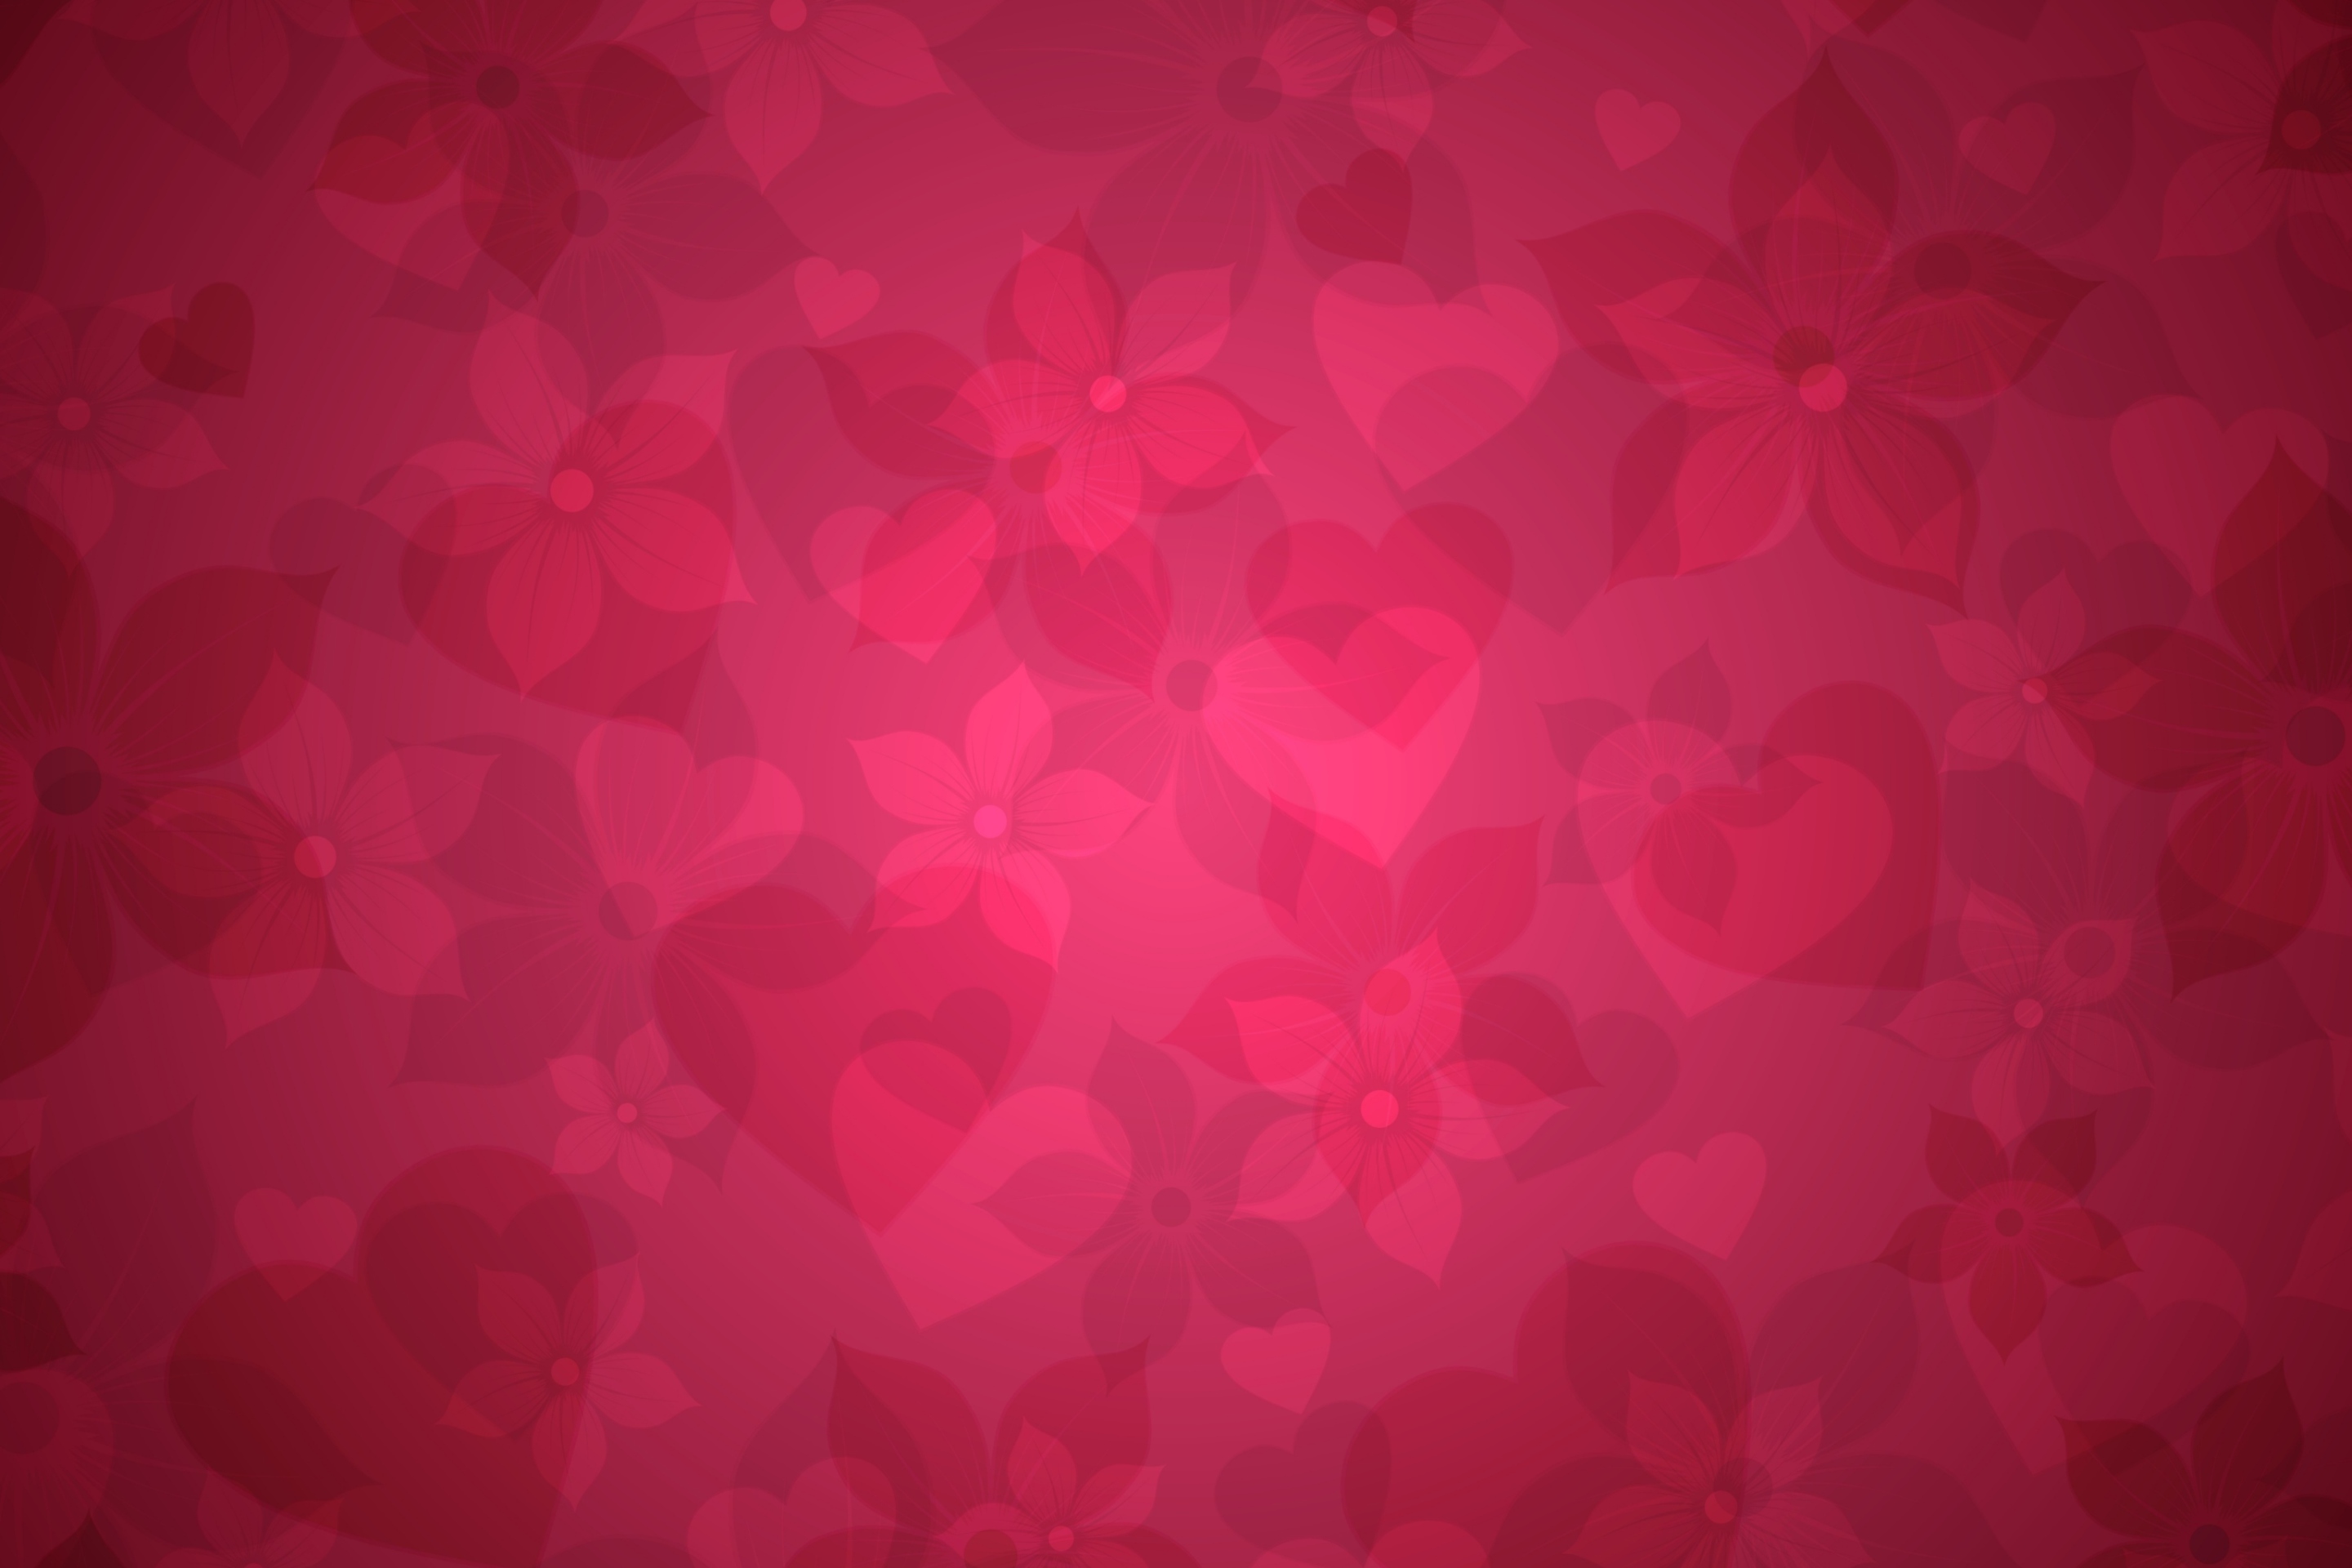 Pink Hearts And Flowers Pattern wallpaper 2880x1920